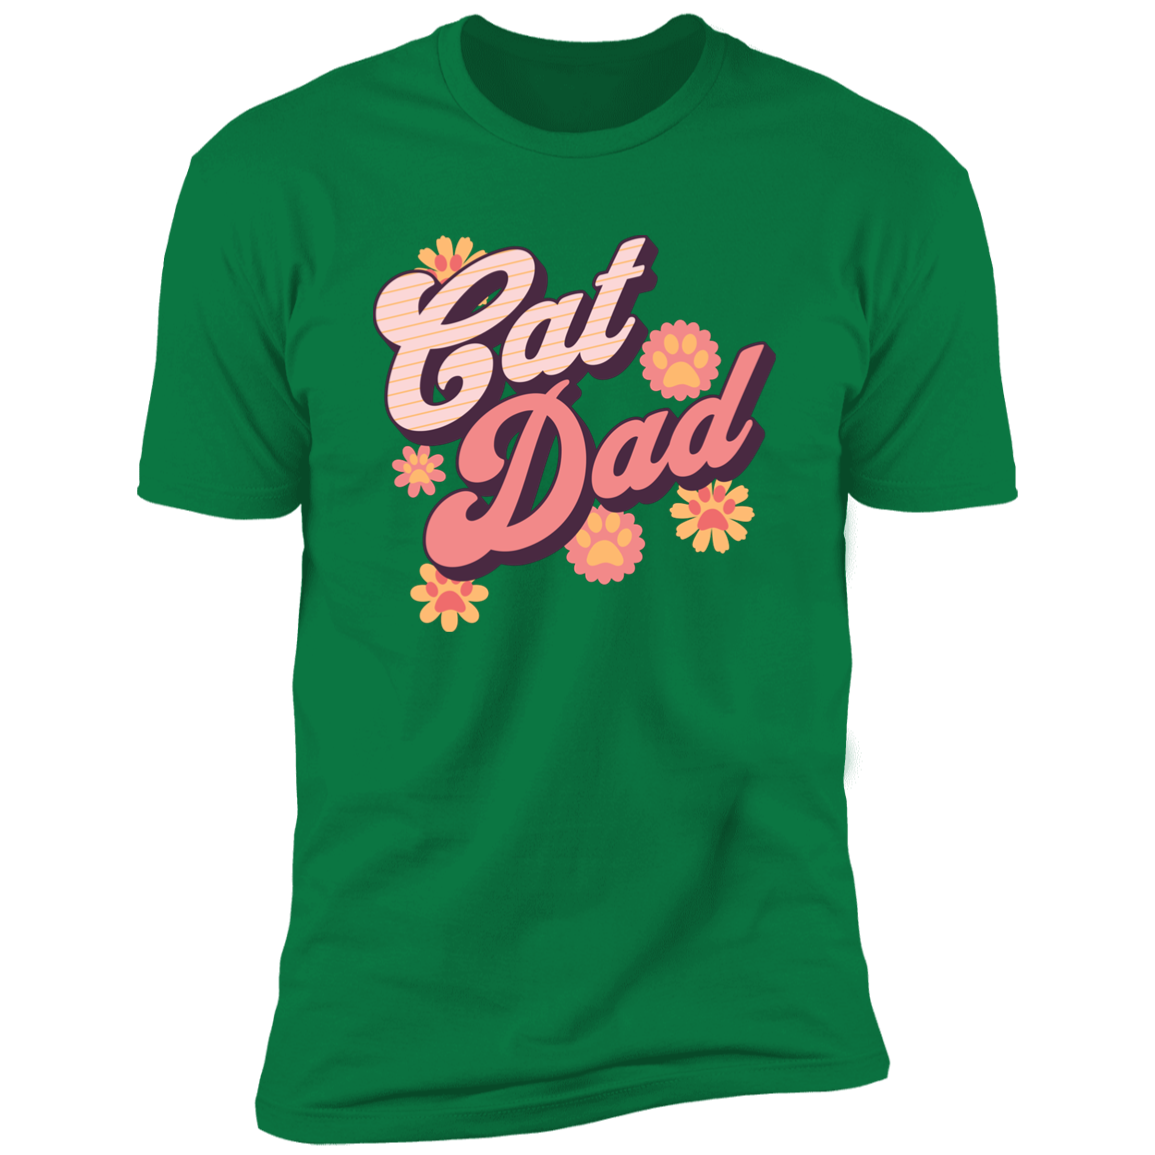 Cat Dad Retro T-shirt, Cat Dad Shirt for humans, in kelly green